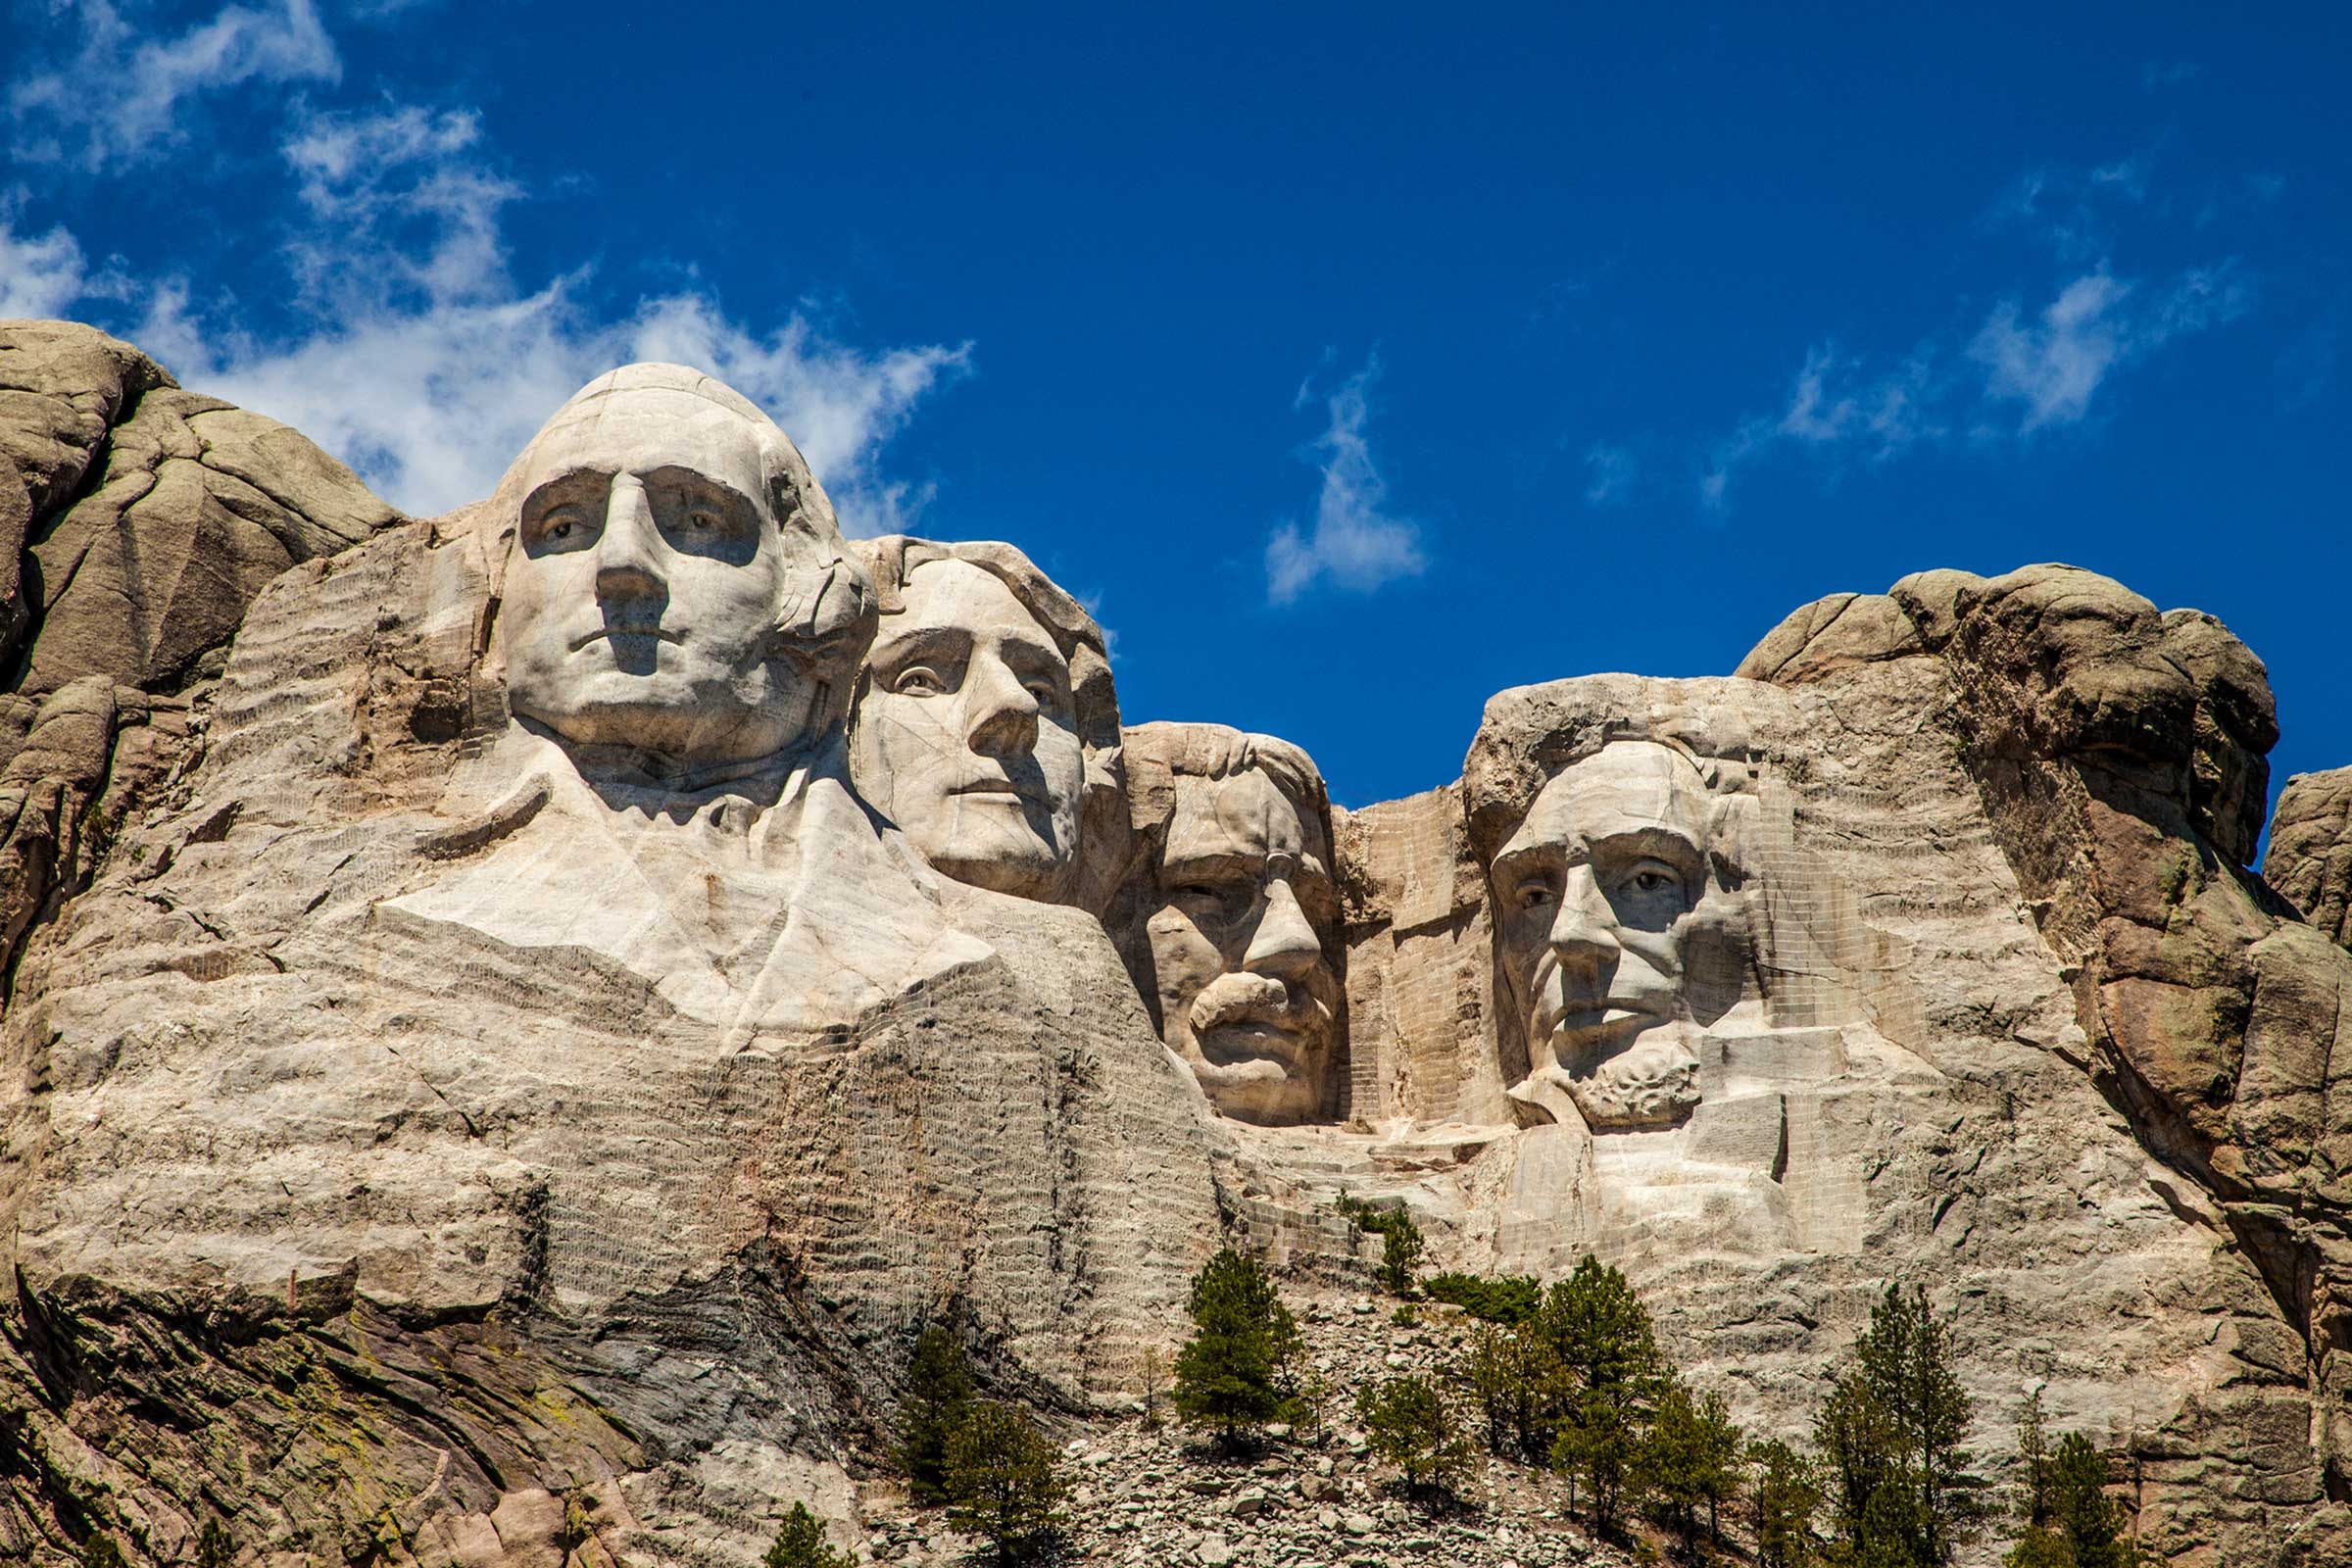 Why We Celebrate Presidents' Day | Reader’s Digest